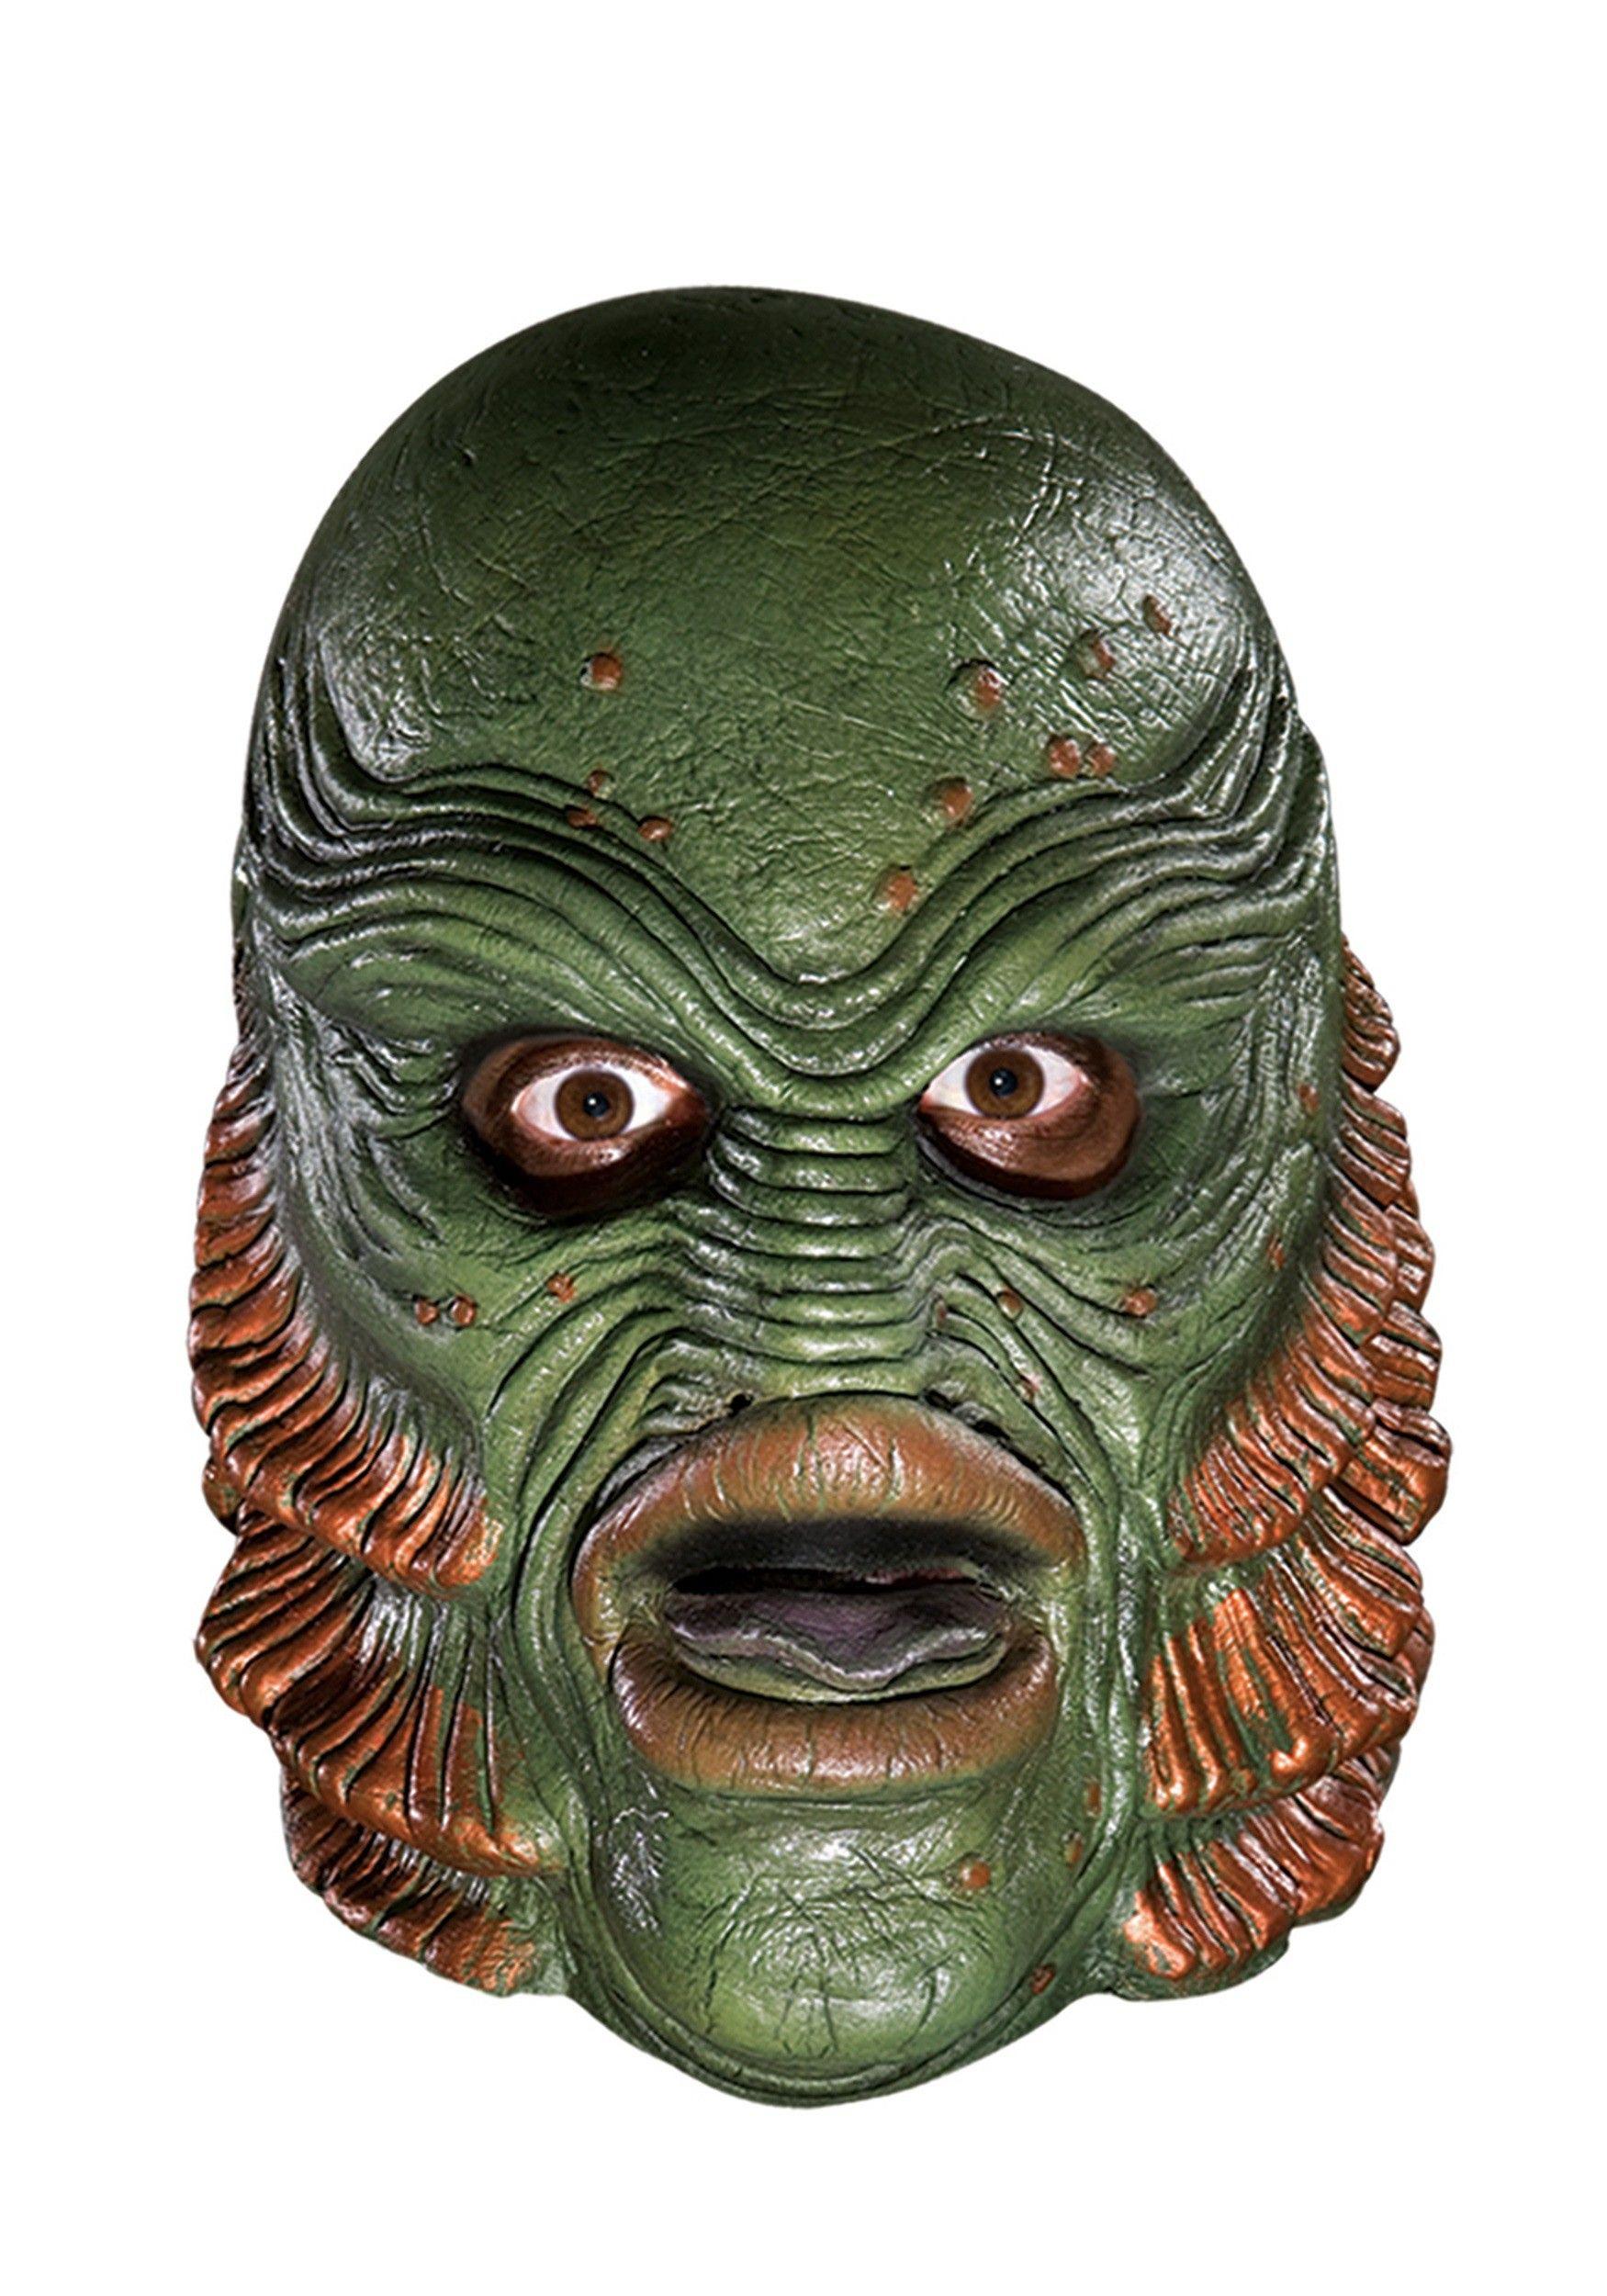 Creature From the Black Lagoon Logo - Deluxe The Creature from the Black Lagoon Mask